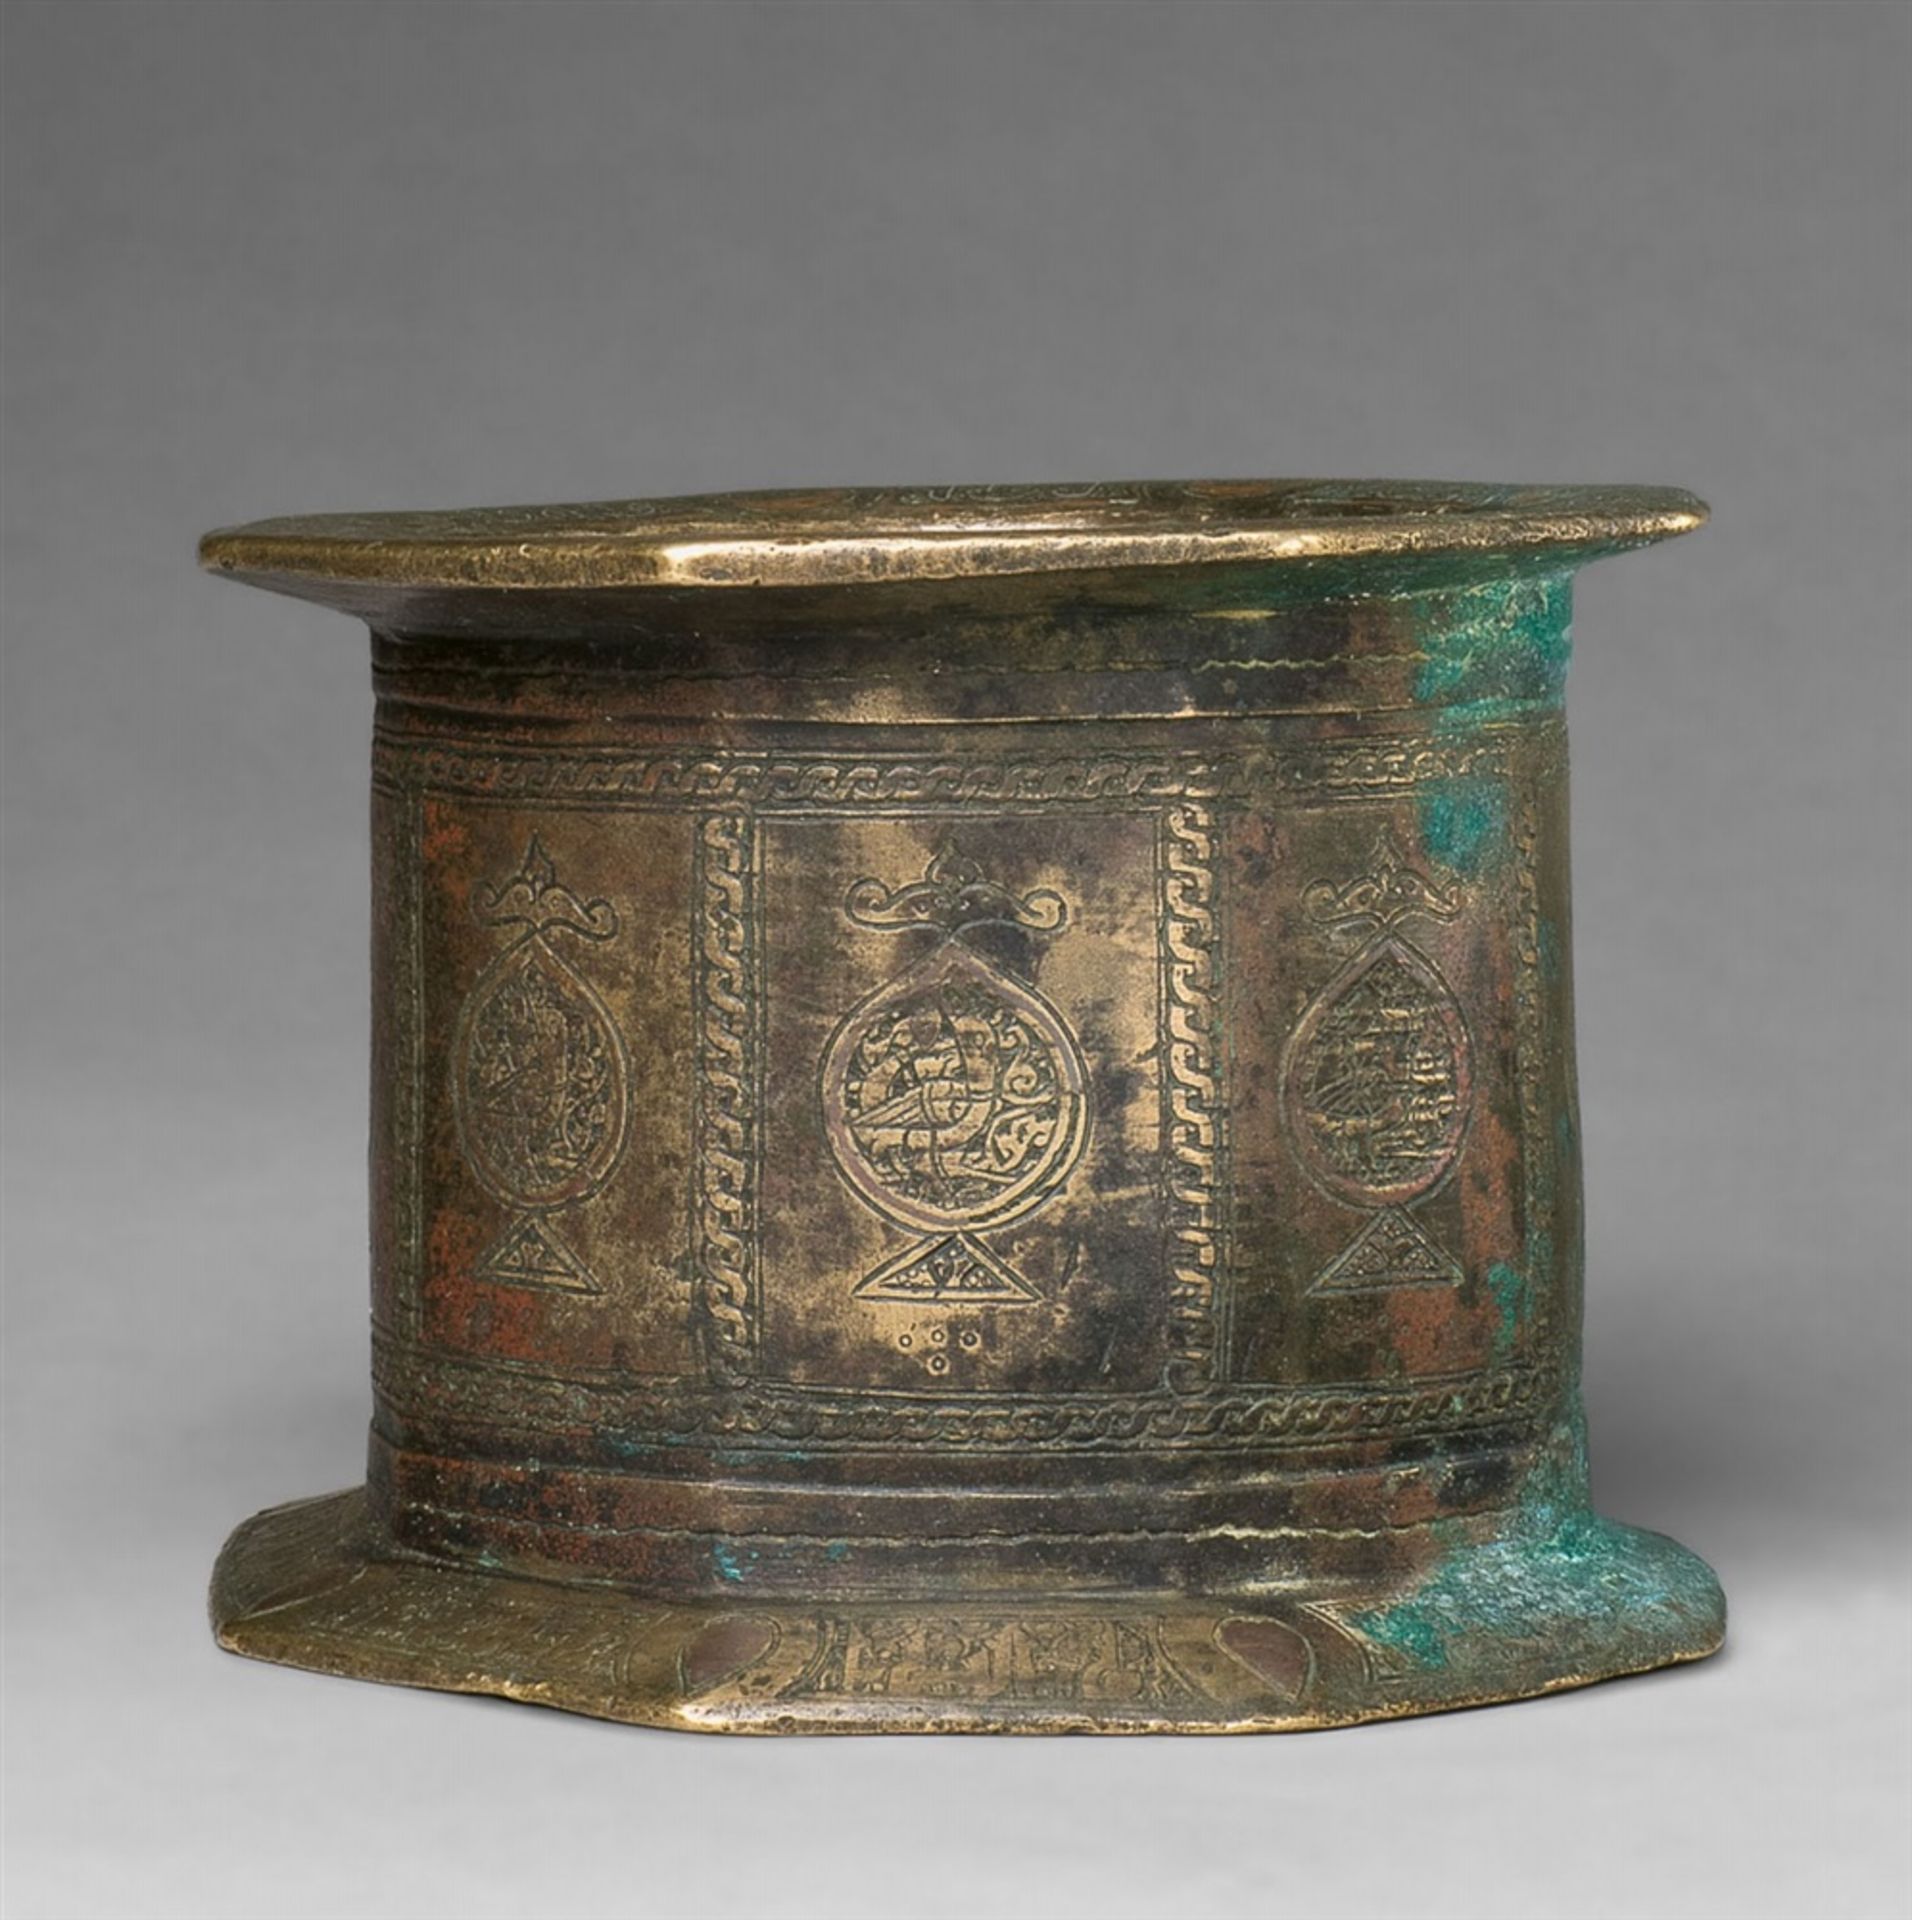 An important Islamic mortarChased cast bronze with copper and silver damascening and remnants of red